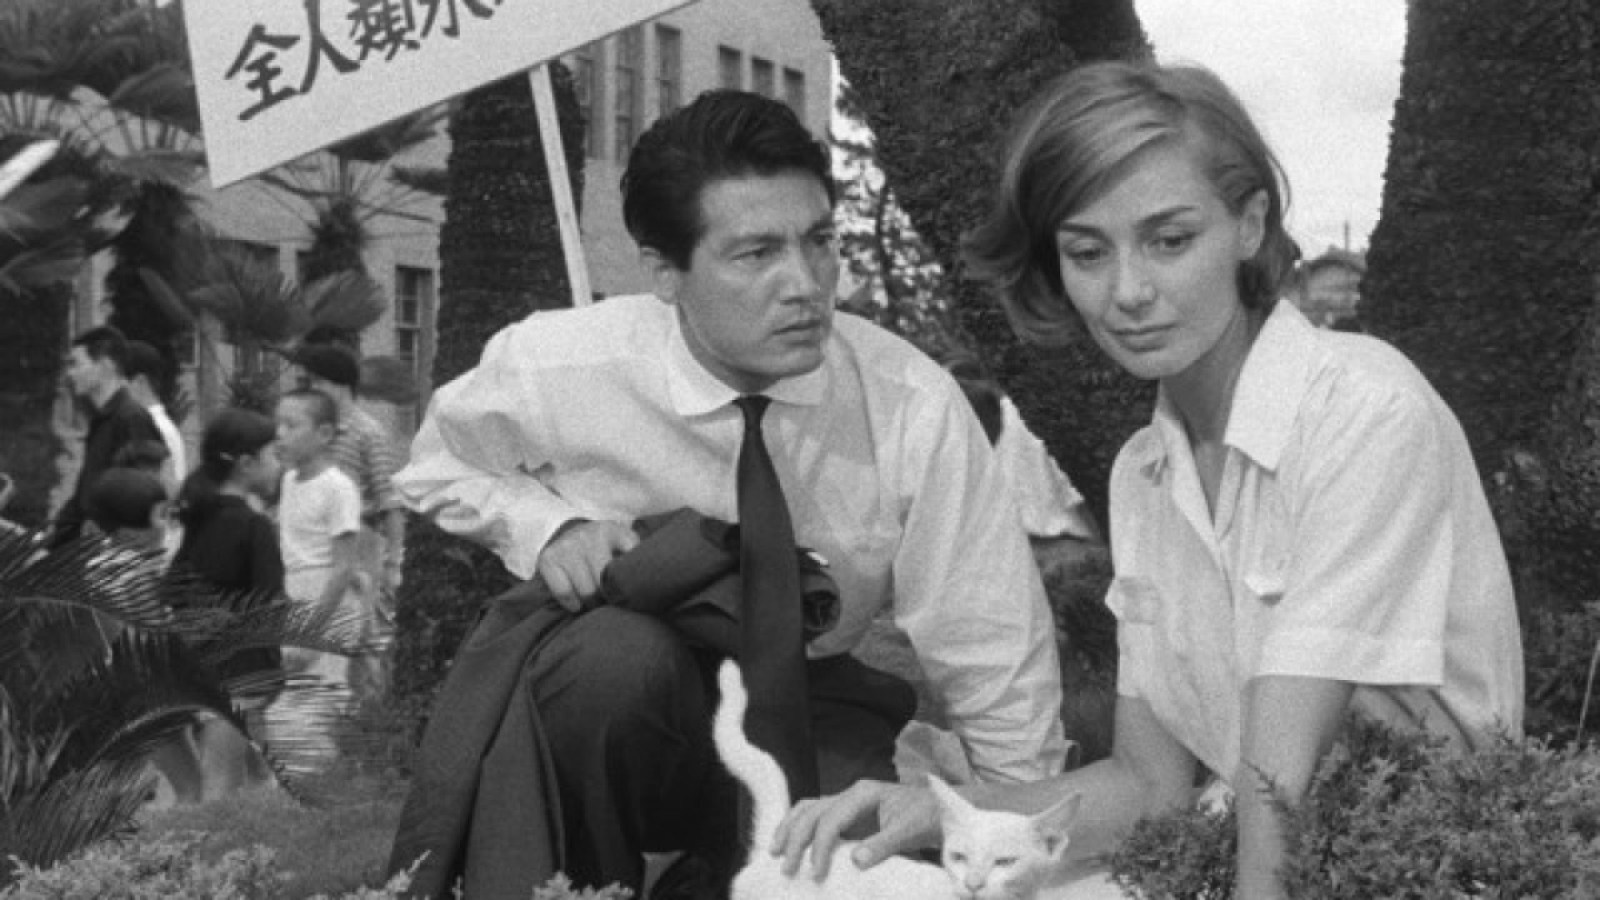 the actress and architect in Hiroshima Mon Amour